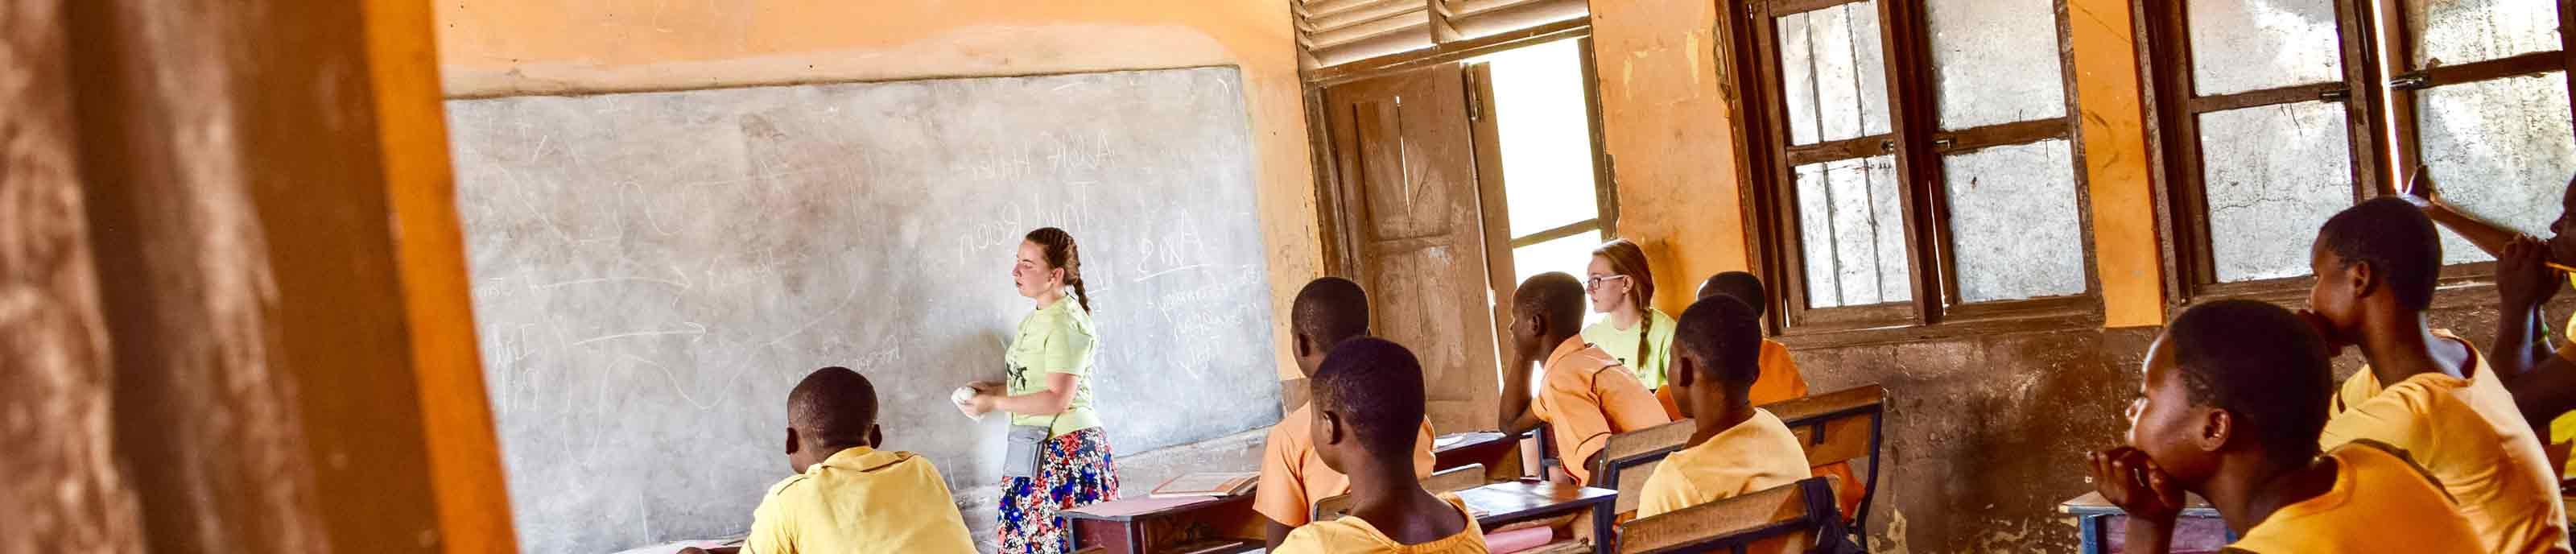 A Benedictine College student teaches at a school in Ghana